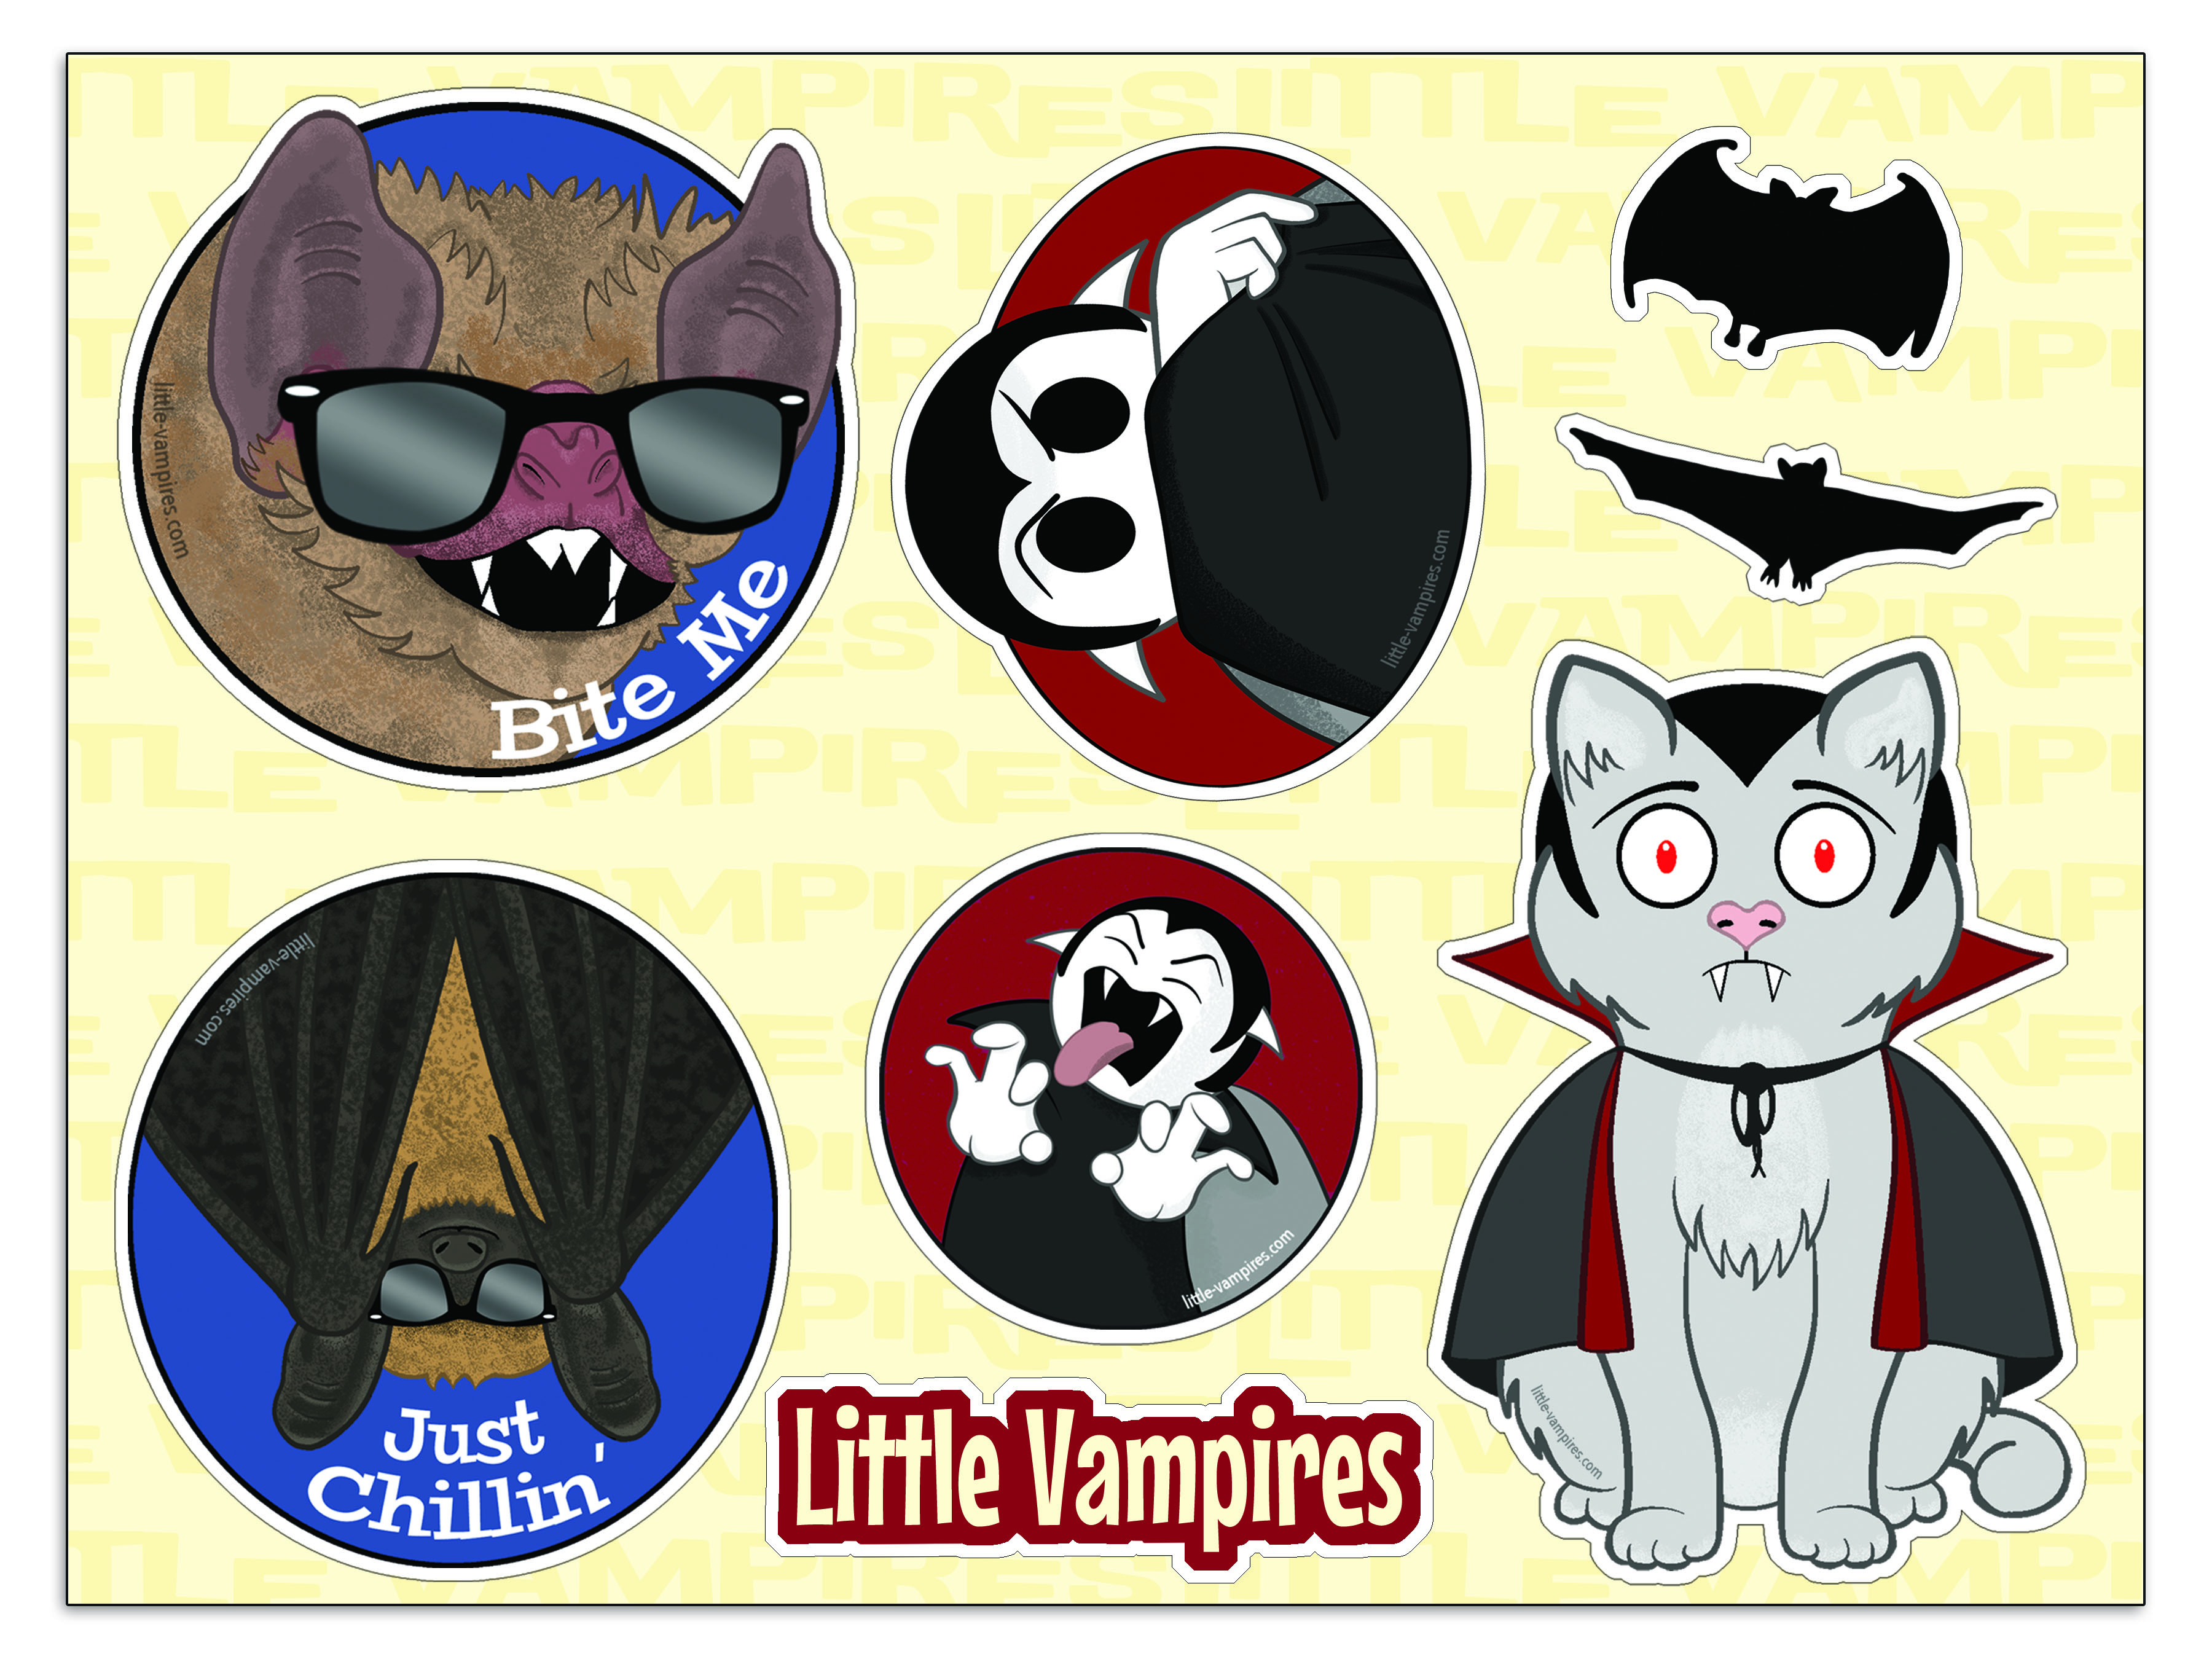 Image of a Little Vampires Kickstarter sticker sheet. Stickers include a vampire bat wearing sunglasses captioned “Bite Me,” a bat hanging upside down captioned “Just Chillin',” a Little Vampire doing the creepy vampire thing with his cape over his lower face, a Little Vampire making a scary bleh-face, two bats, and a vampire kitten